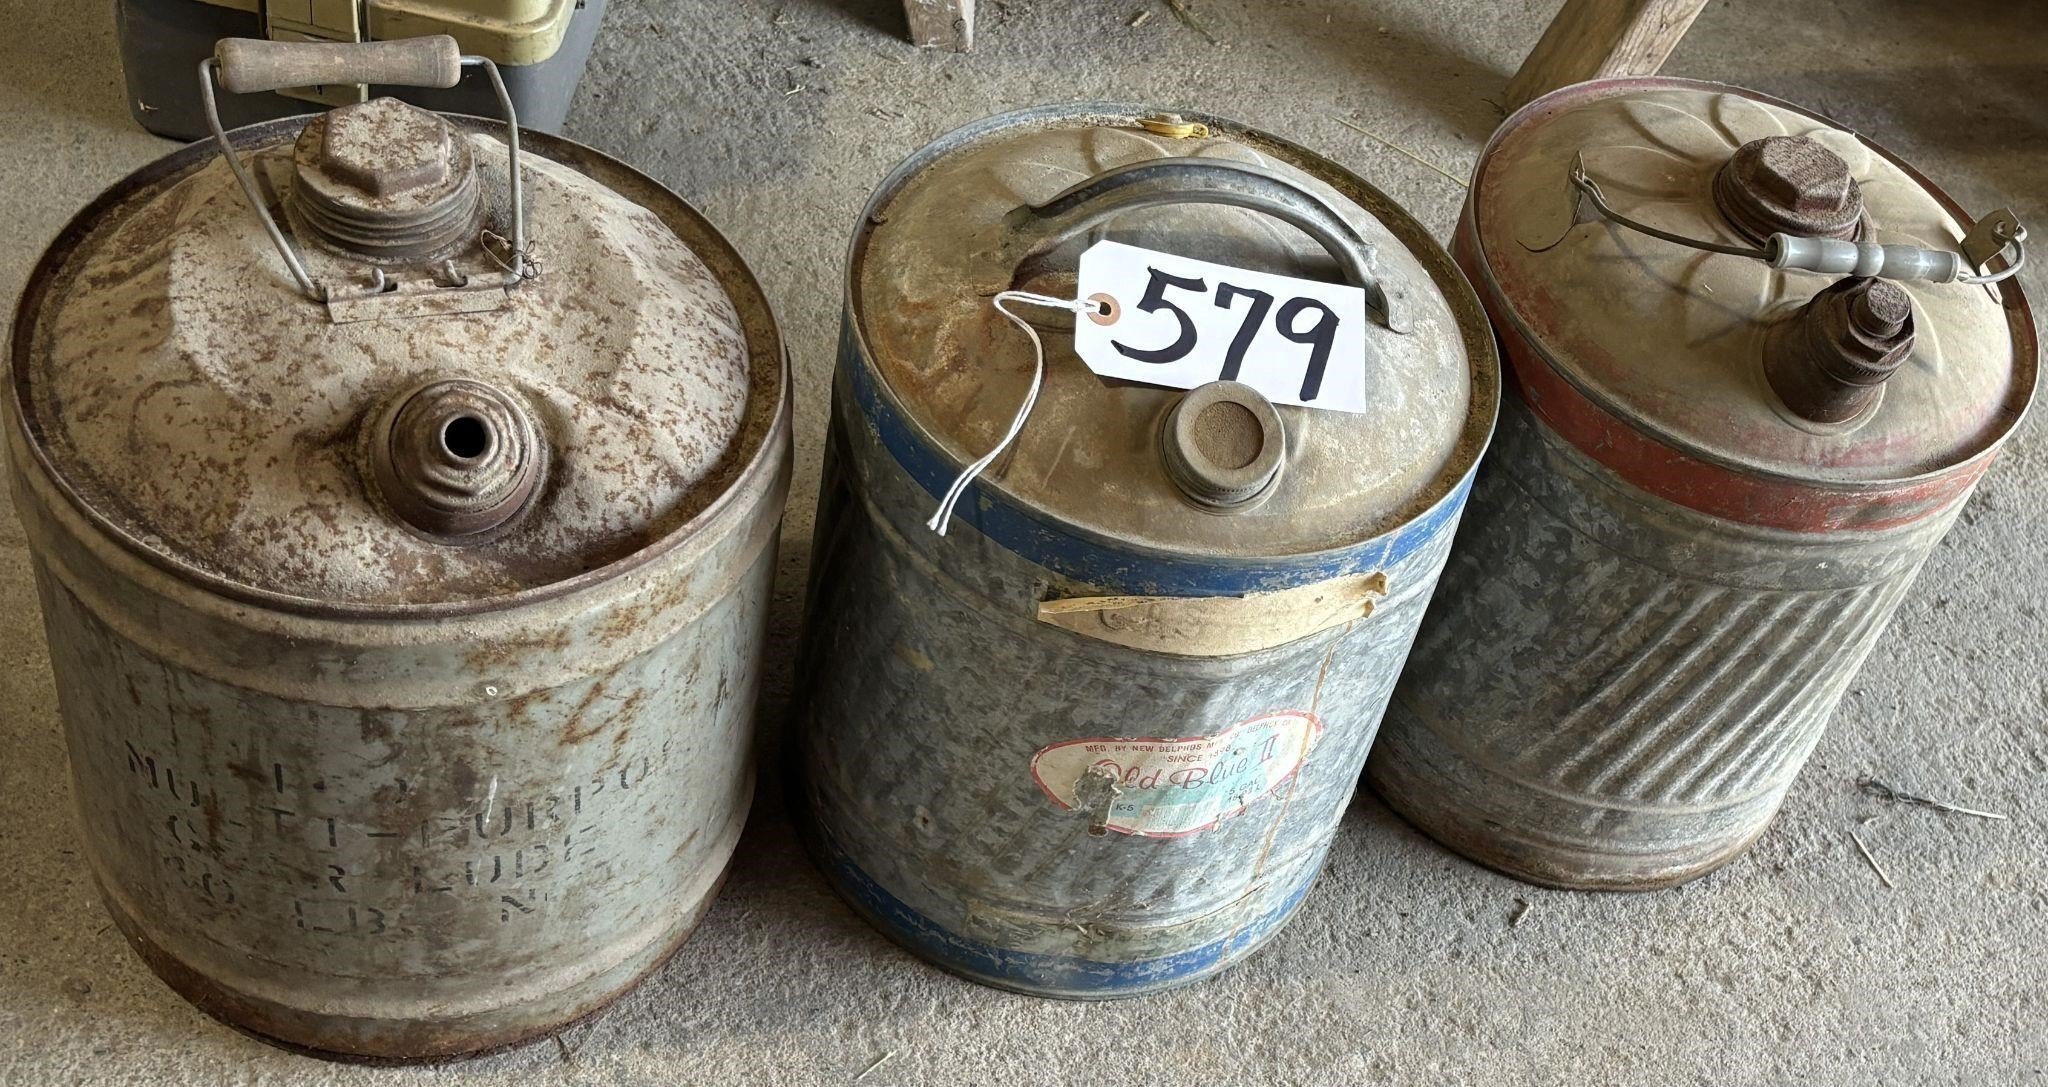 3 Galvanized Metal Fuel Cans